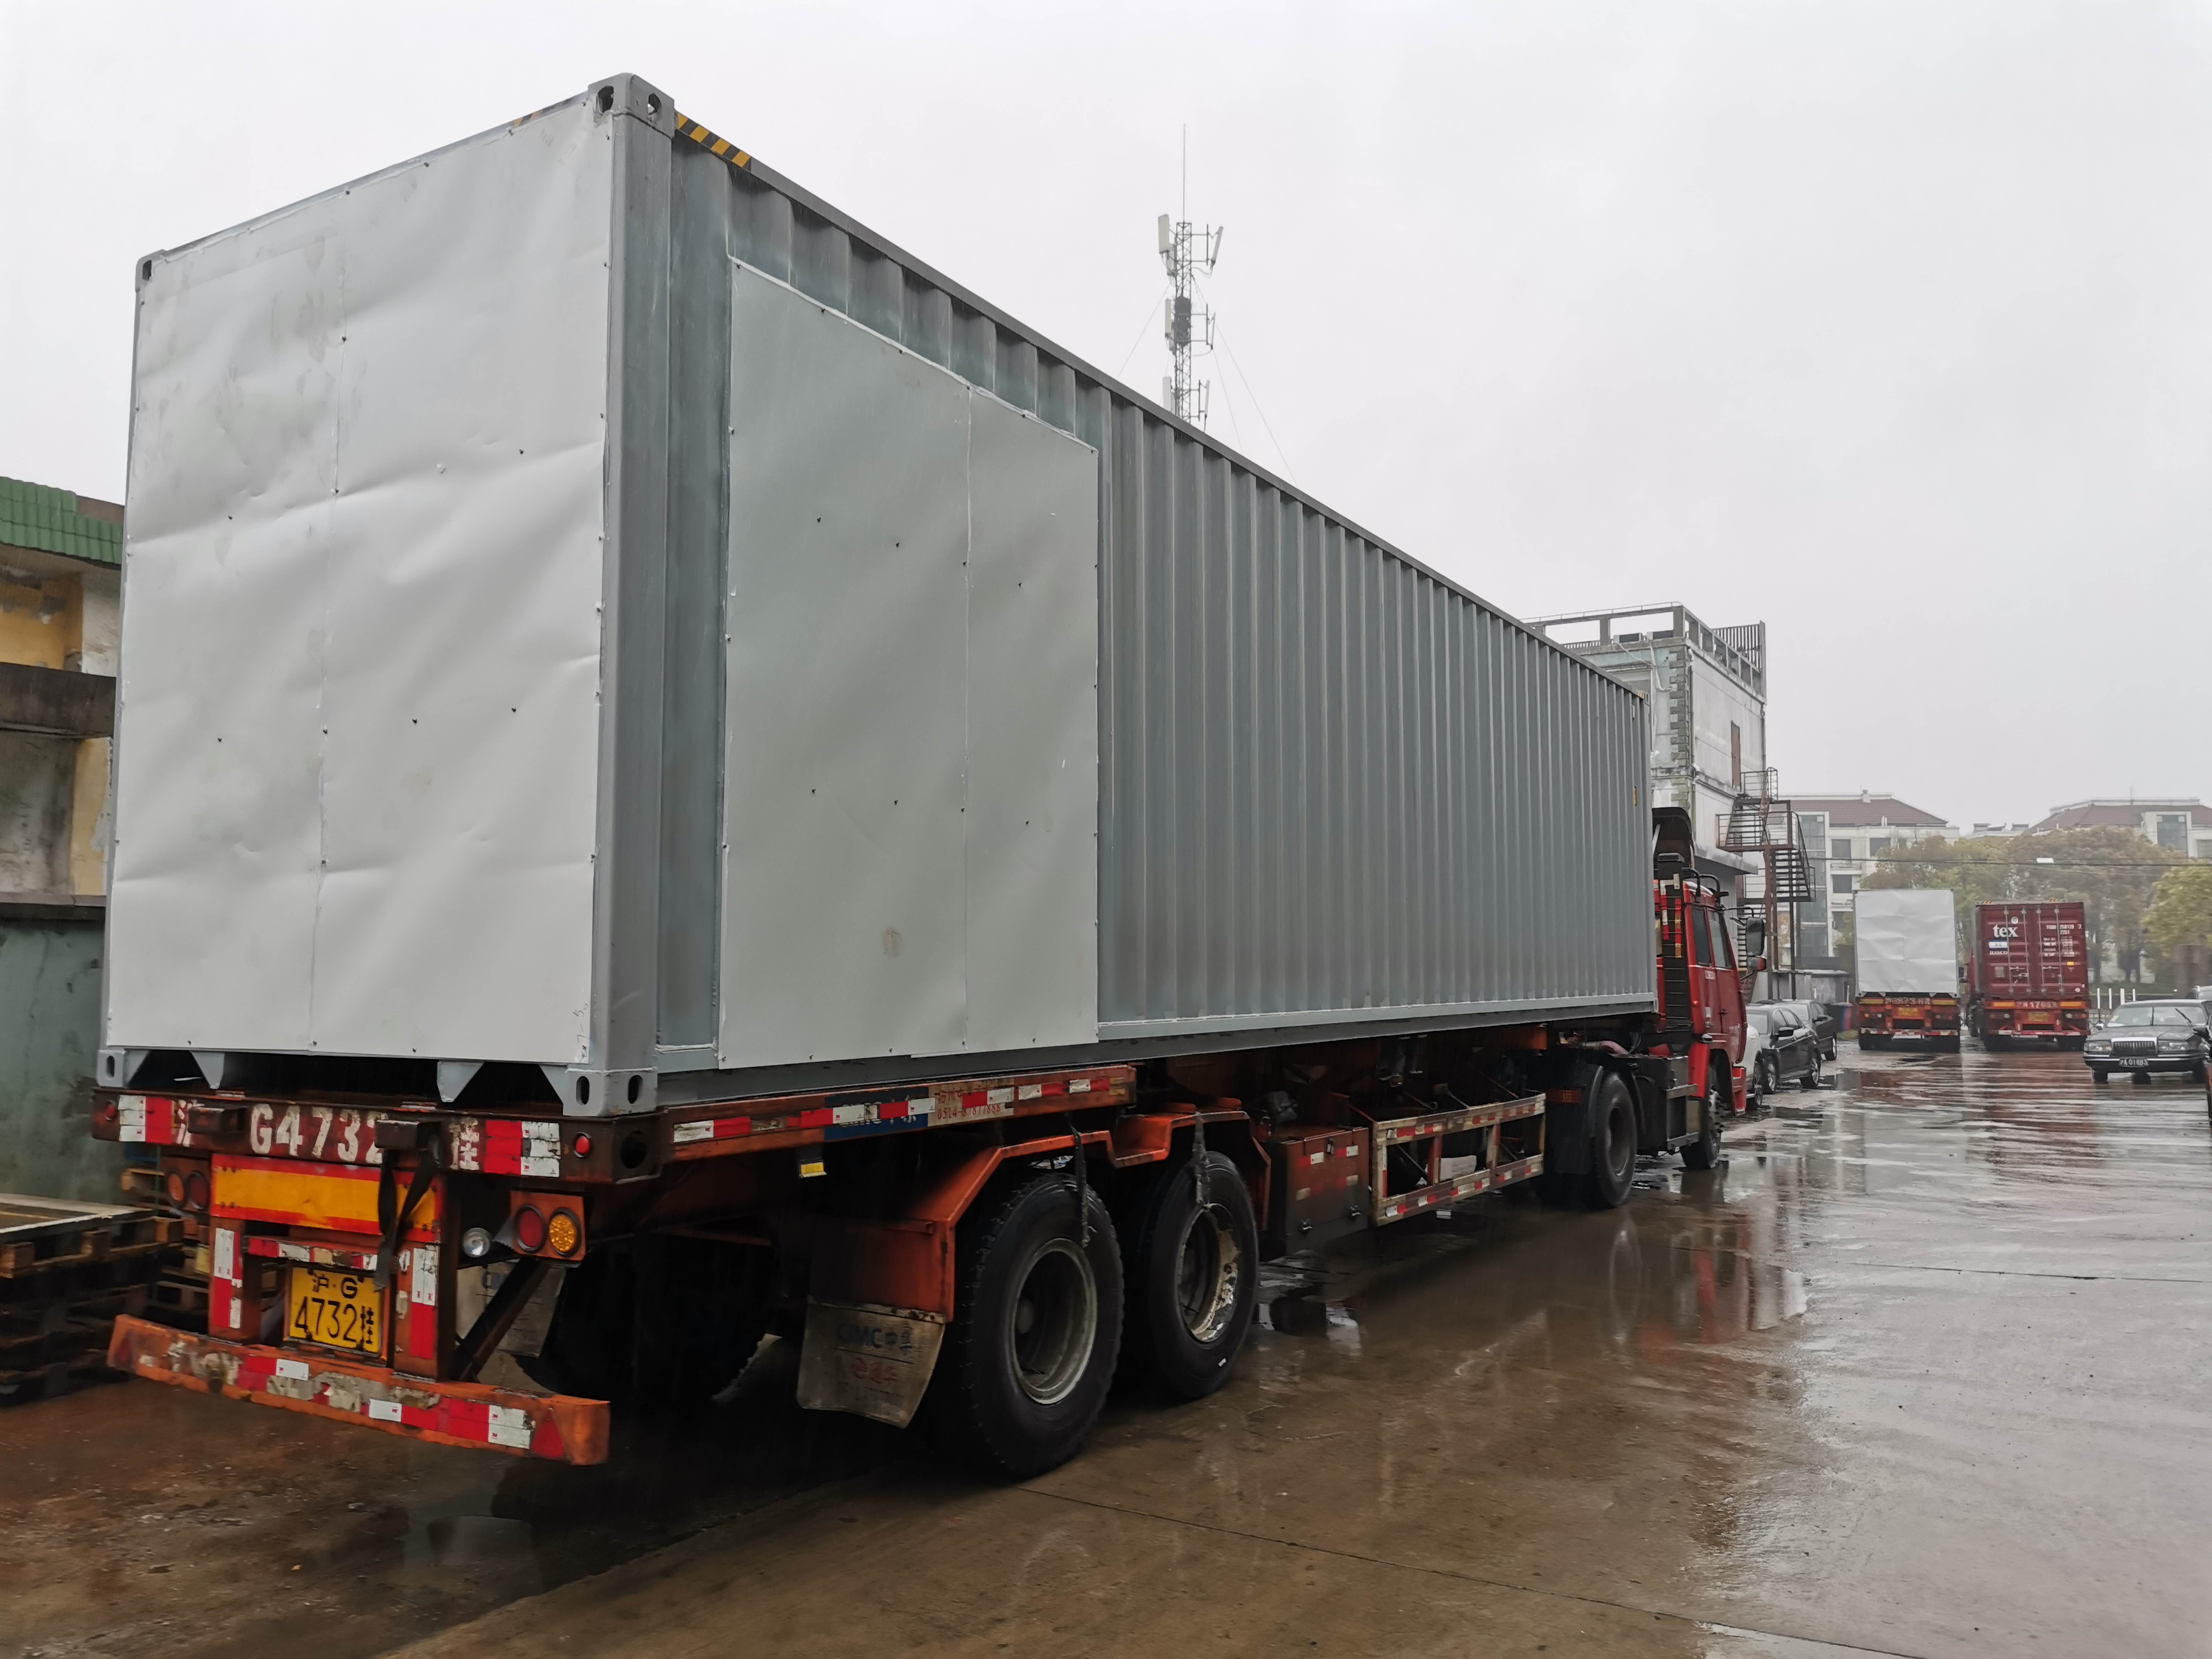 shipping container mobile hospital, modular hospital container ward factory, modular hospital container ward supplier, container hospital design, container hospital mobile